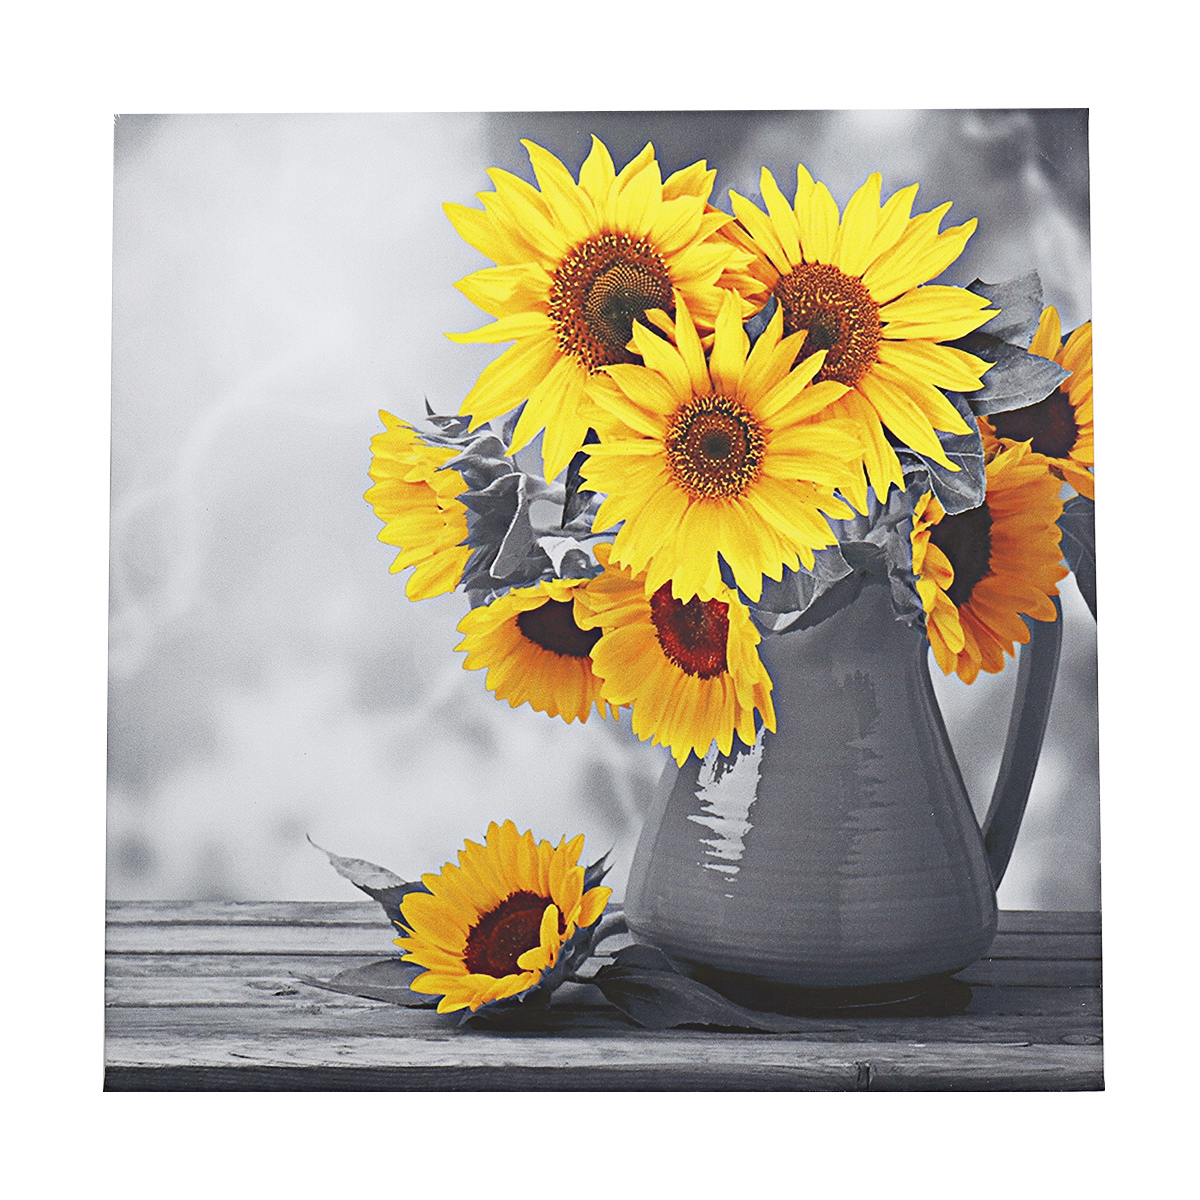 30303-cm-Sunflower-Wall-Art-Painting-Living-Room-Bedroom-Hanging-Canvas-Pictures-Office-Mural-Decora-1791798-13